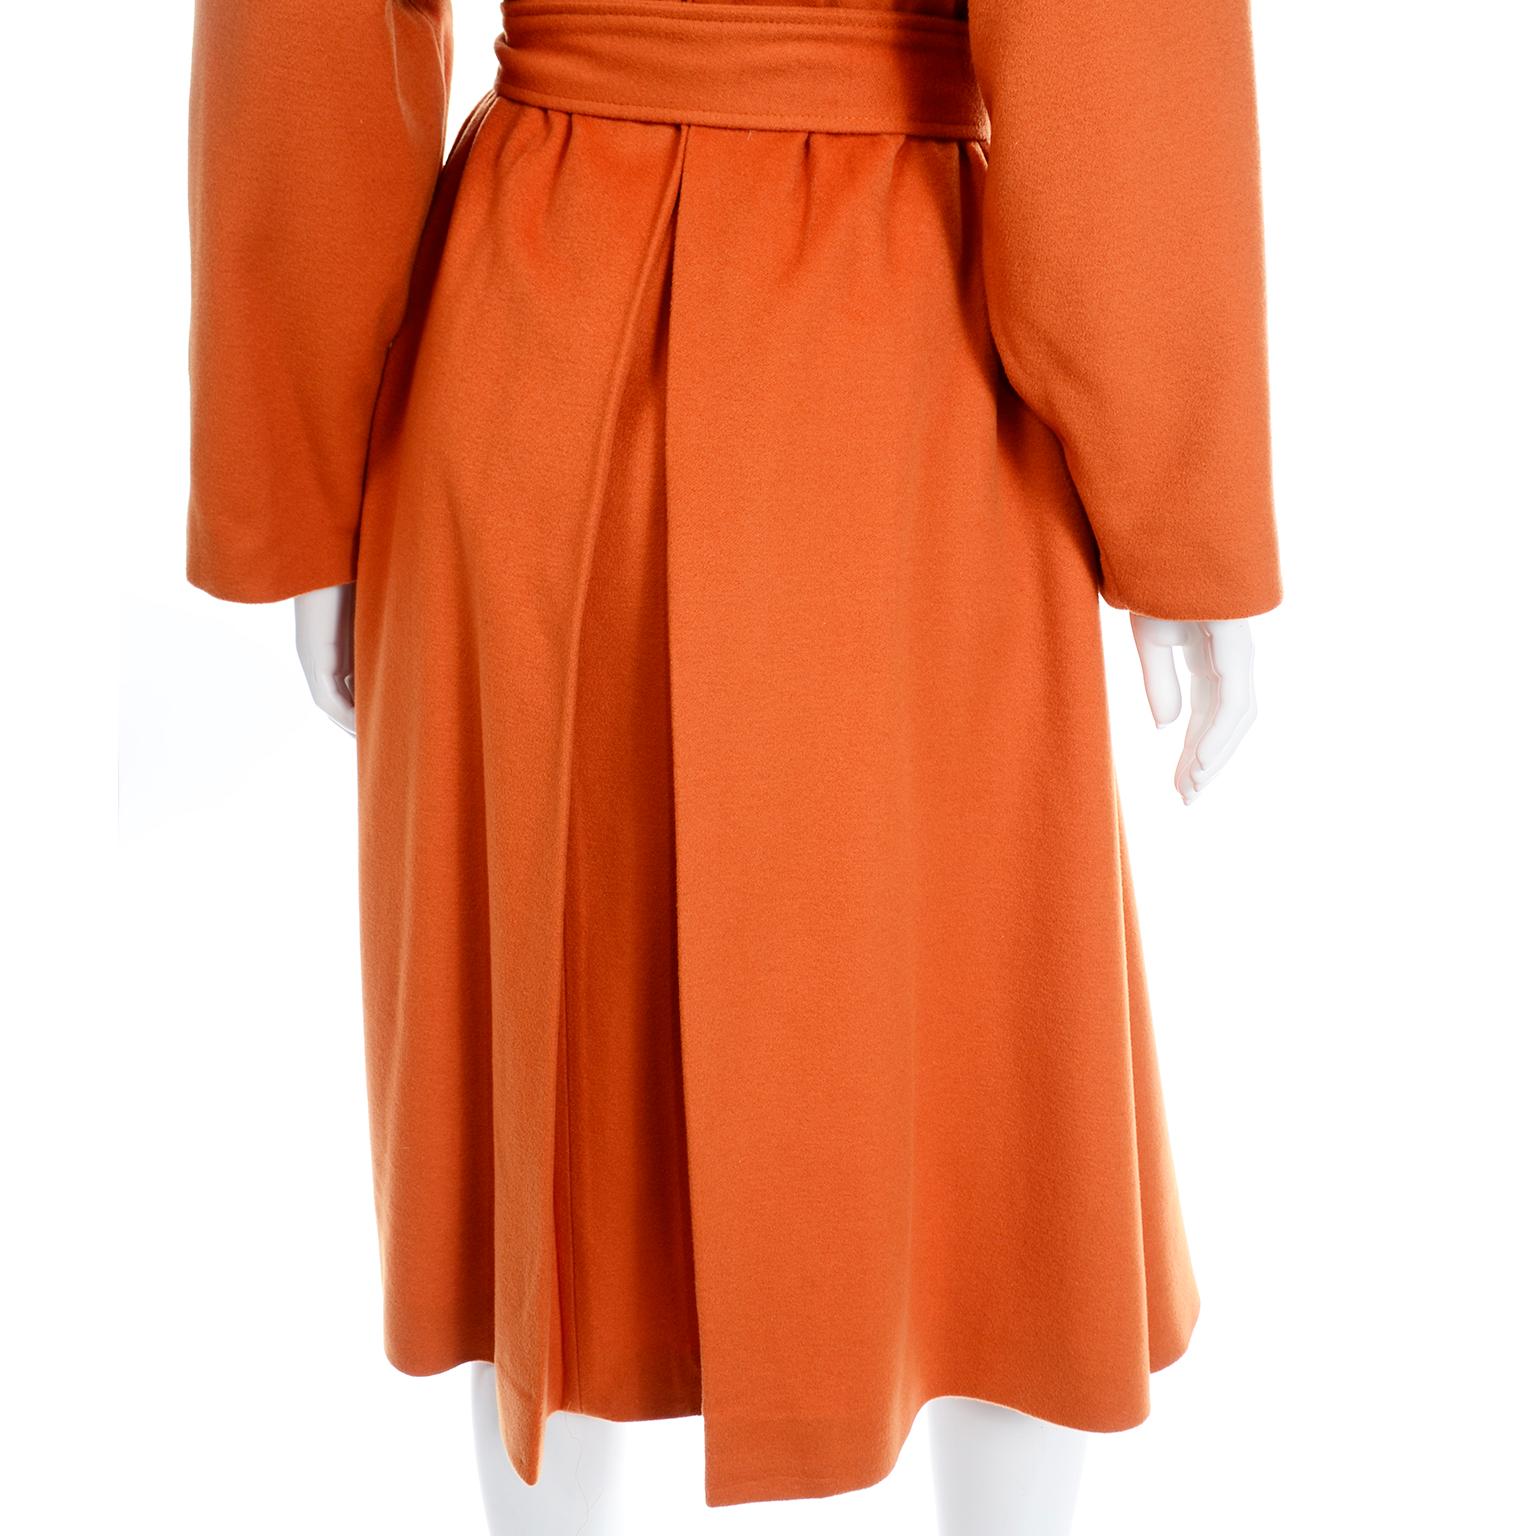 Guy Laroche Vintage Orange Cashmere Blend Double Breasted Trench Coat With Belt For Sale 1